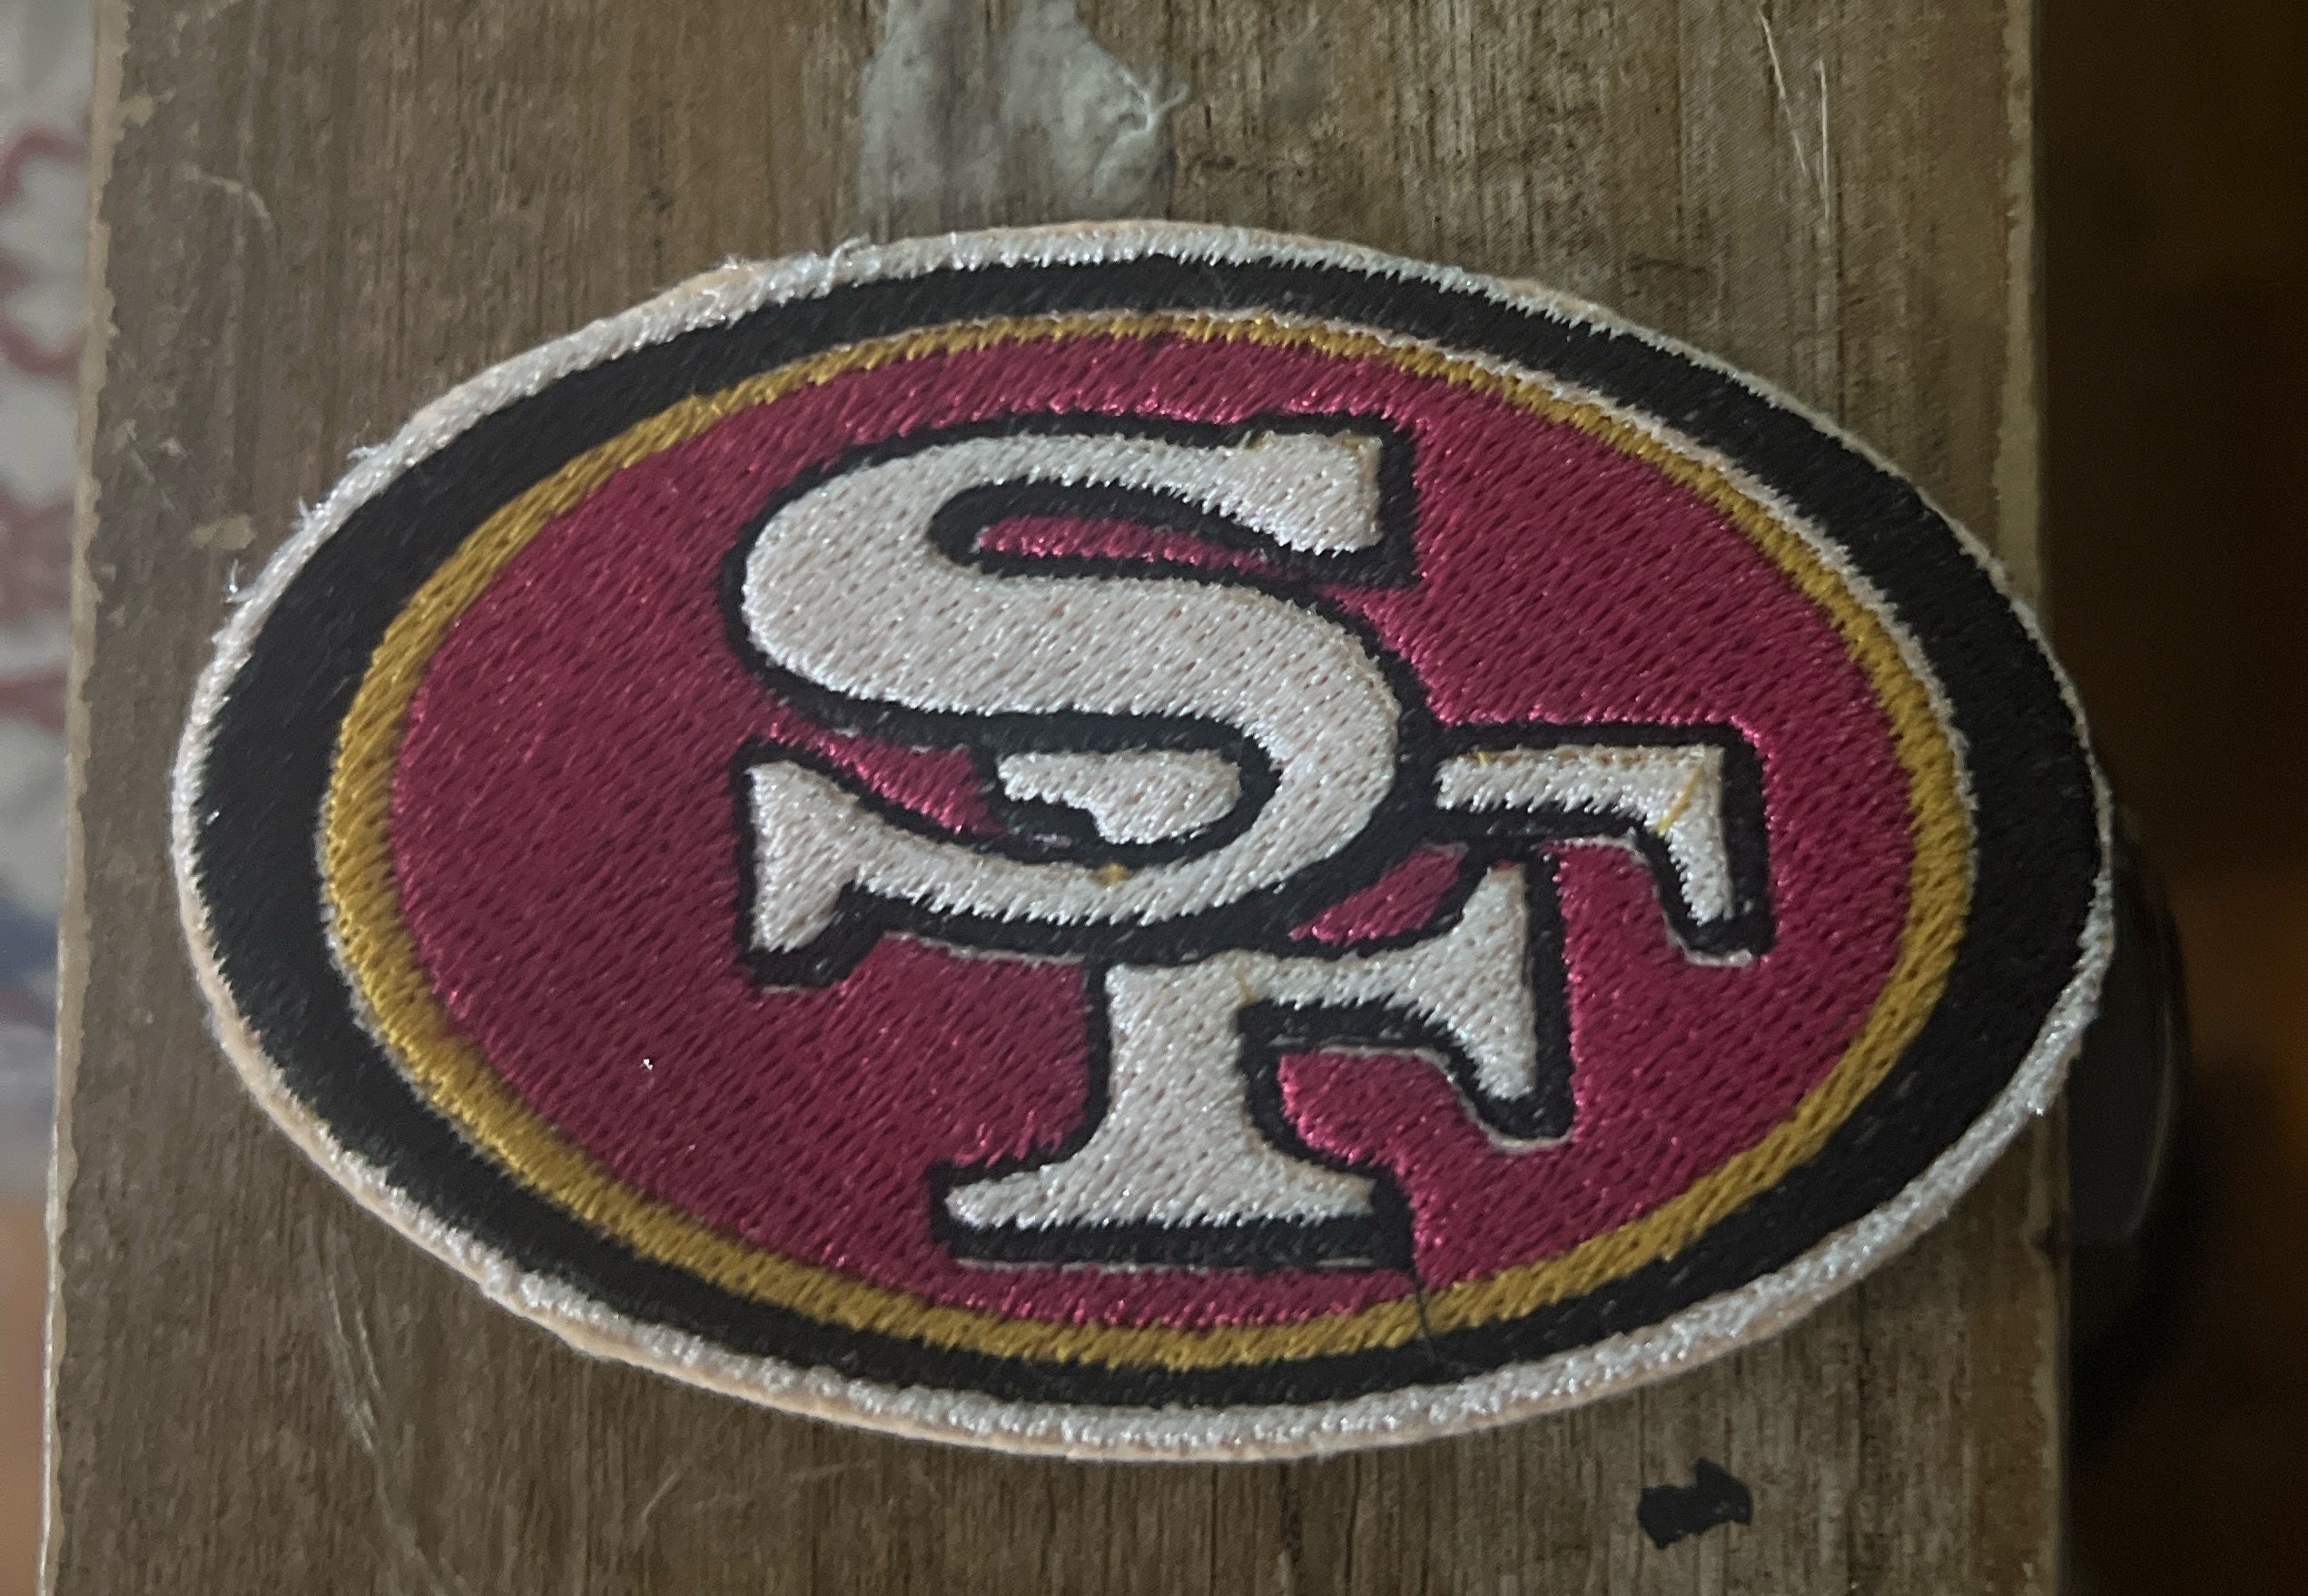 San Francisco 49ers NFL Football Patches Iron,Sew(Select options)✈Thai by  USPS